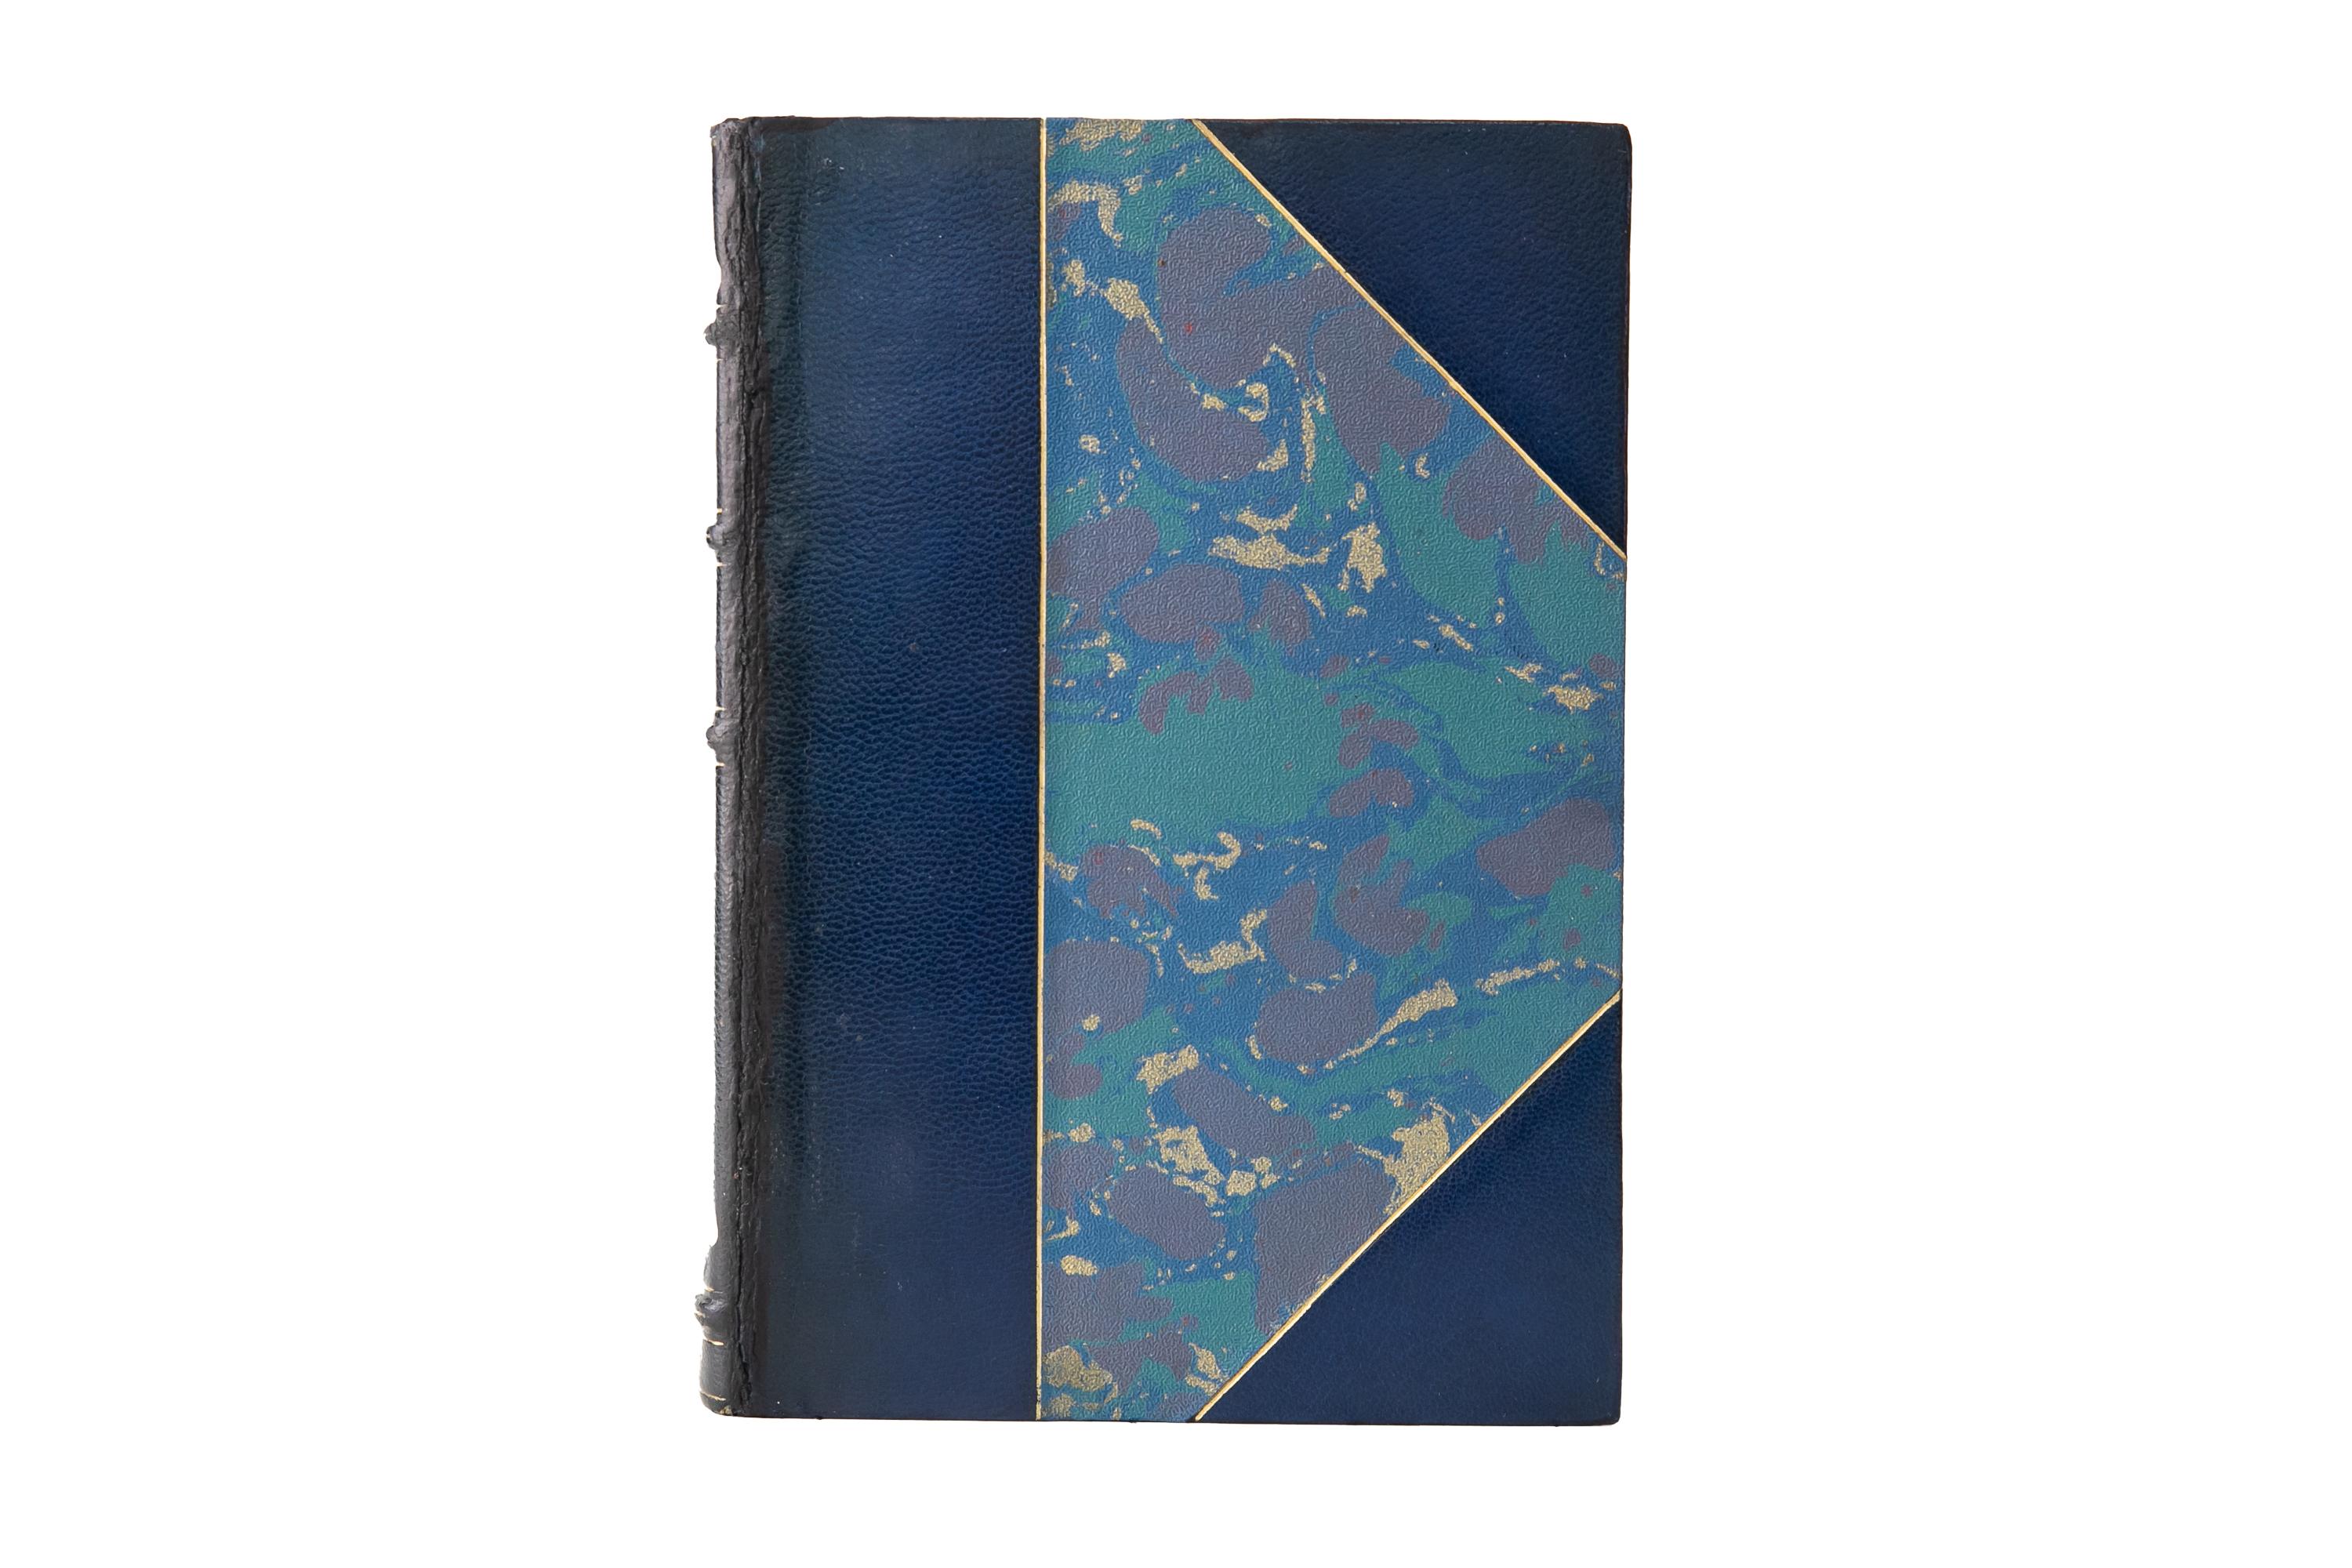 1 Volume. Auguste Rodin, Art. Bound in 3/4 blue morocco and marbled boards with the covers and raised band spine displaying gilt-tooled detailing. The top edge is gilt with marbled endpapers. Translated from the French of Paul Gsell by Mrs. Romilly